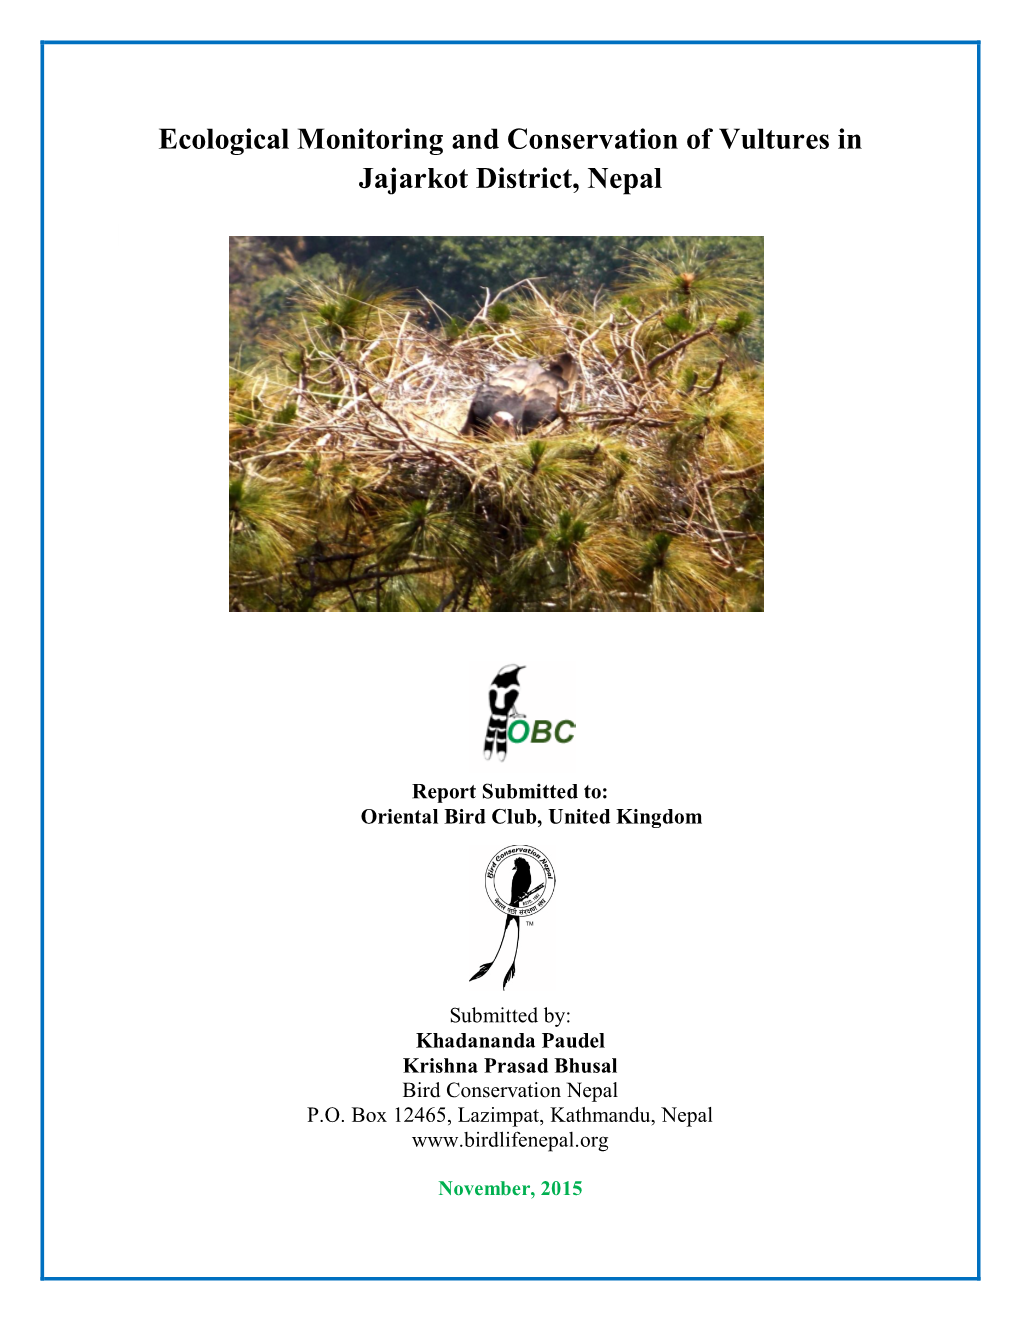 Ecological Monitoring and Conservation of Vultures in Jajarkot District, Nepal